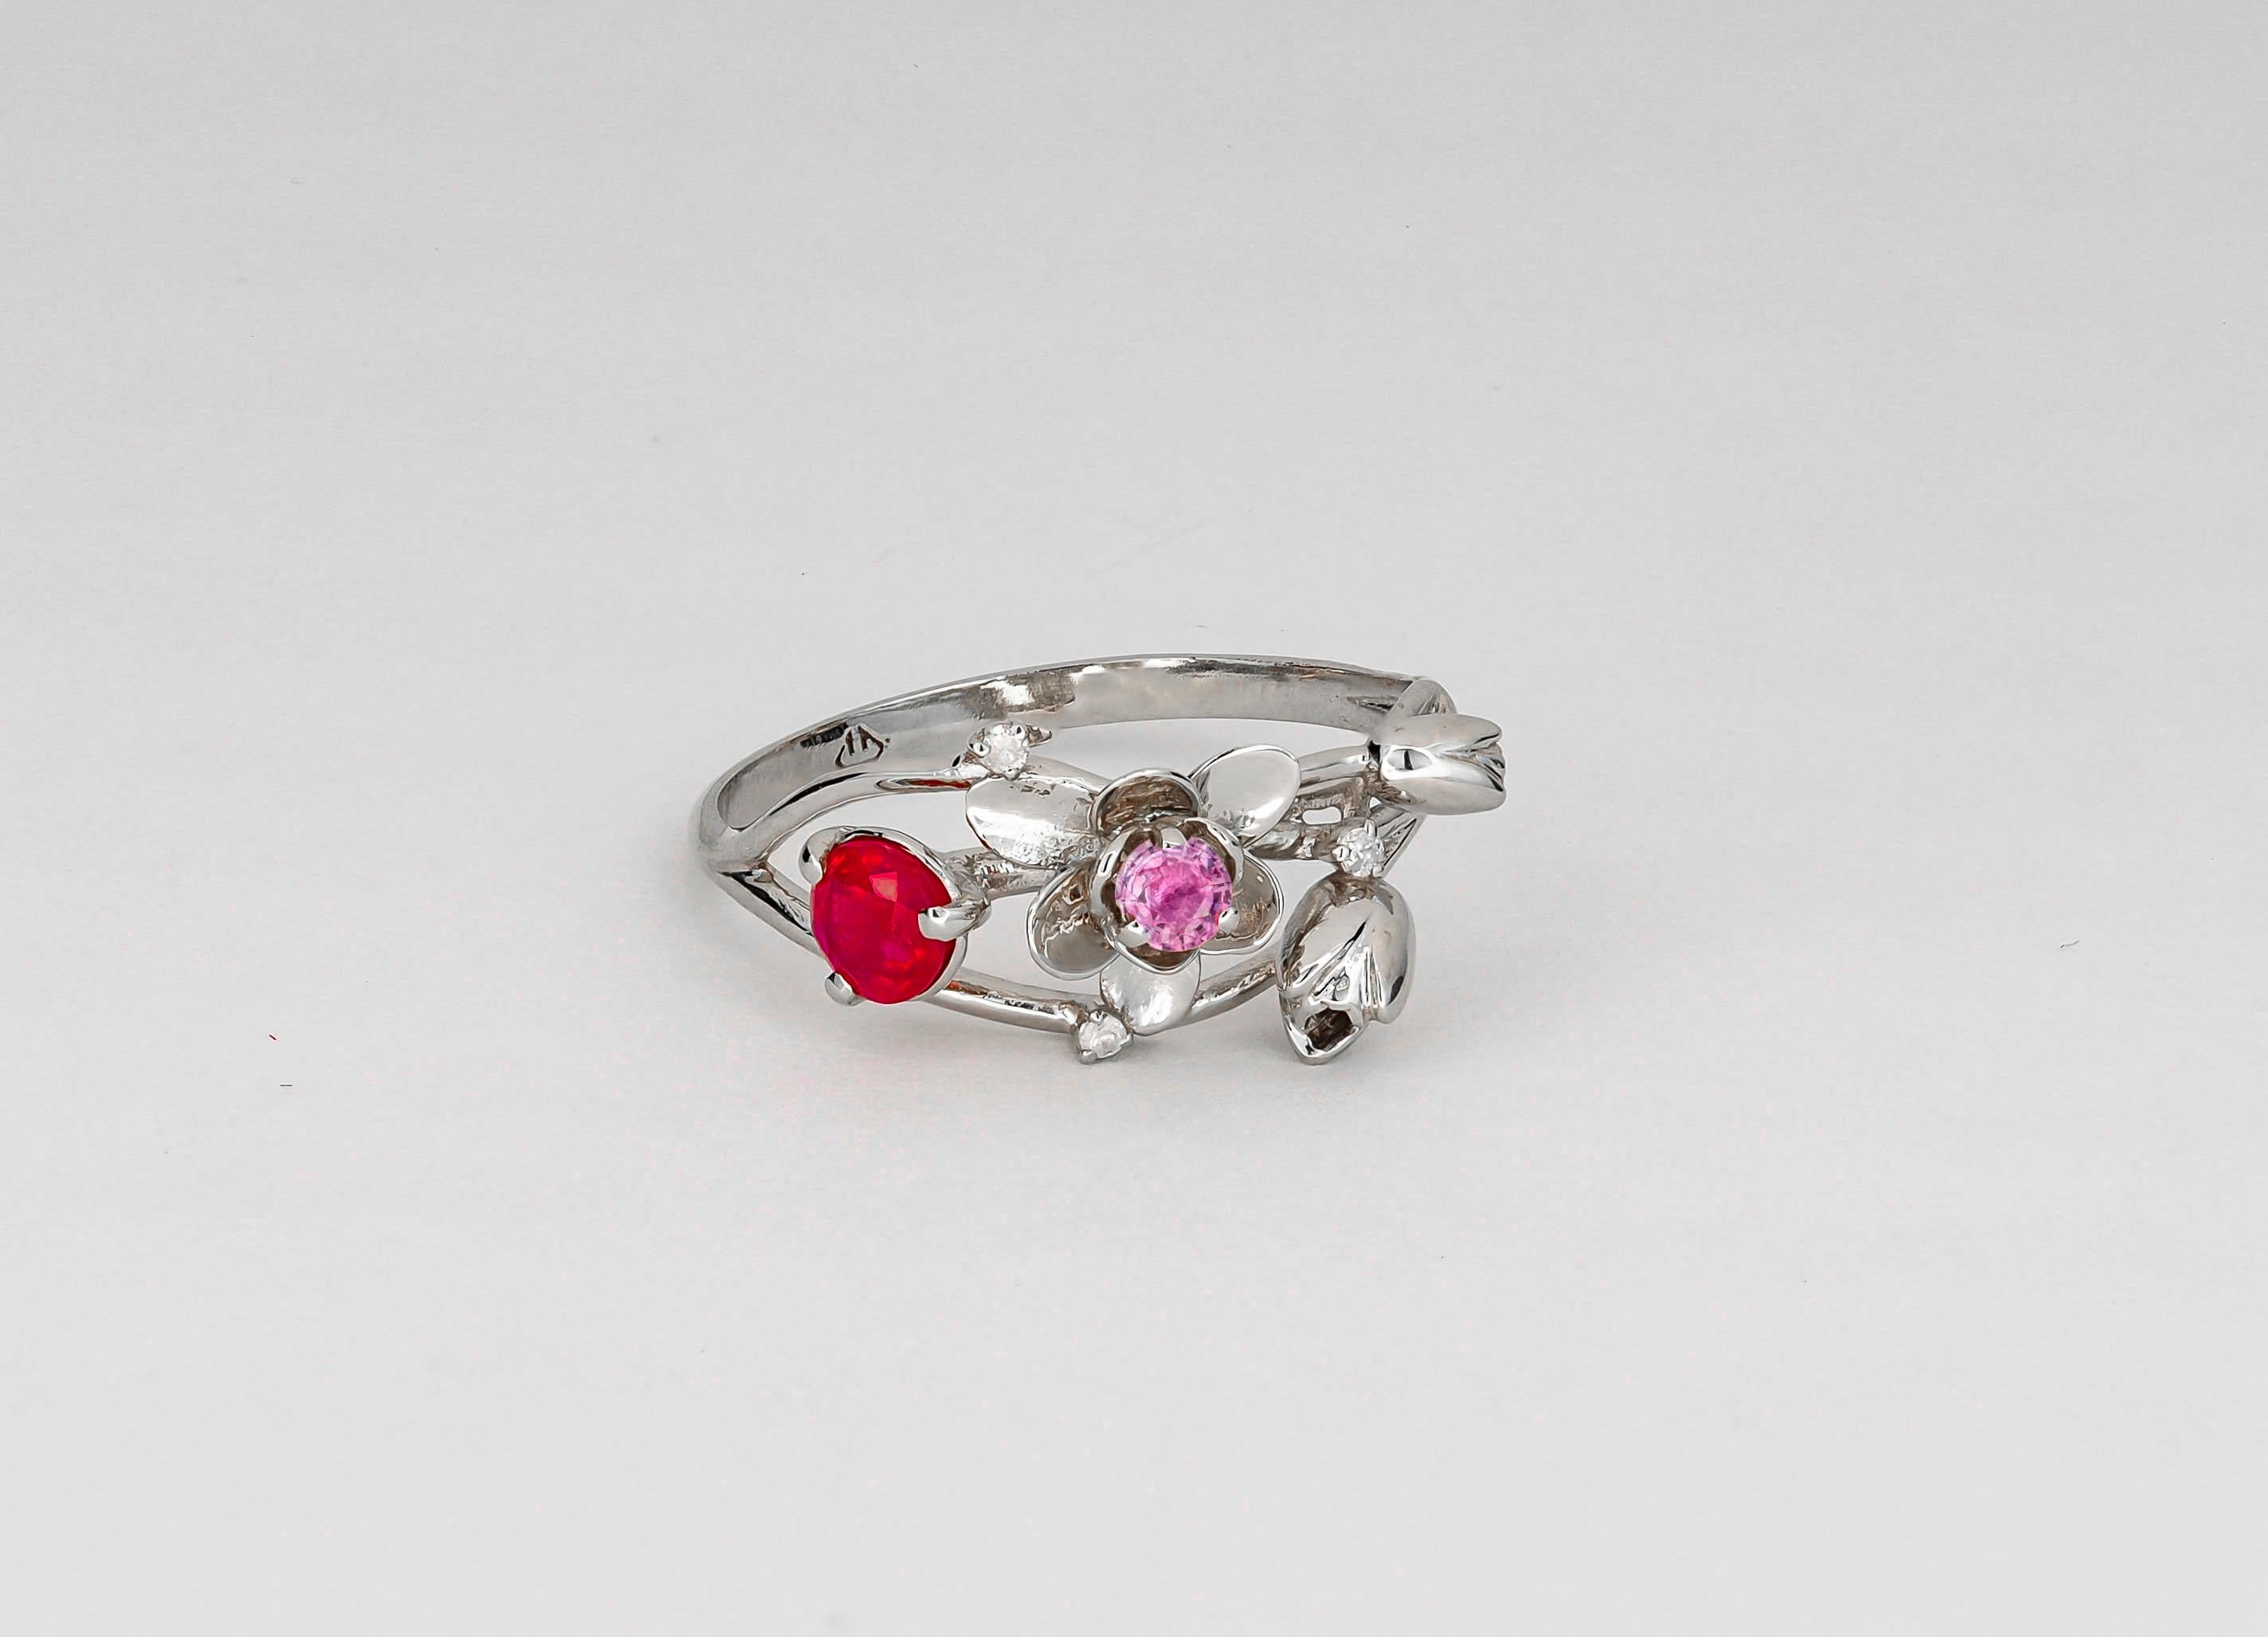 Round Cut 14 Karat White Gold Ring with Ruby, Sapphire and Diamonds. Orchid Gold Ring